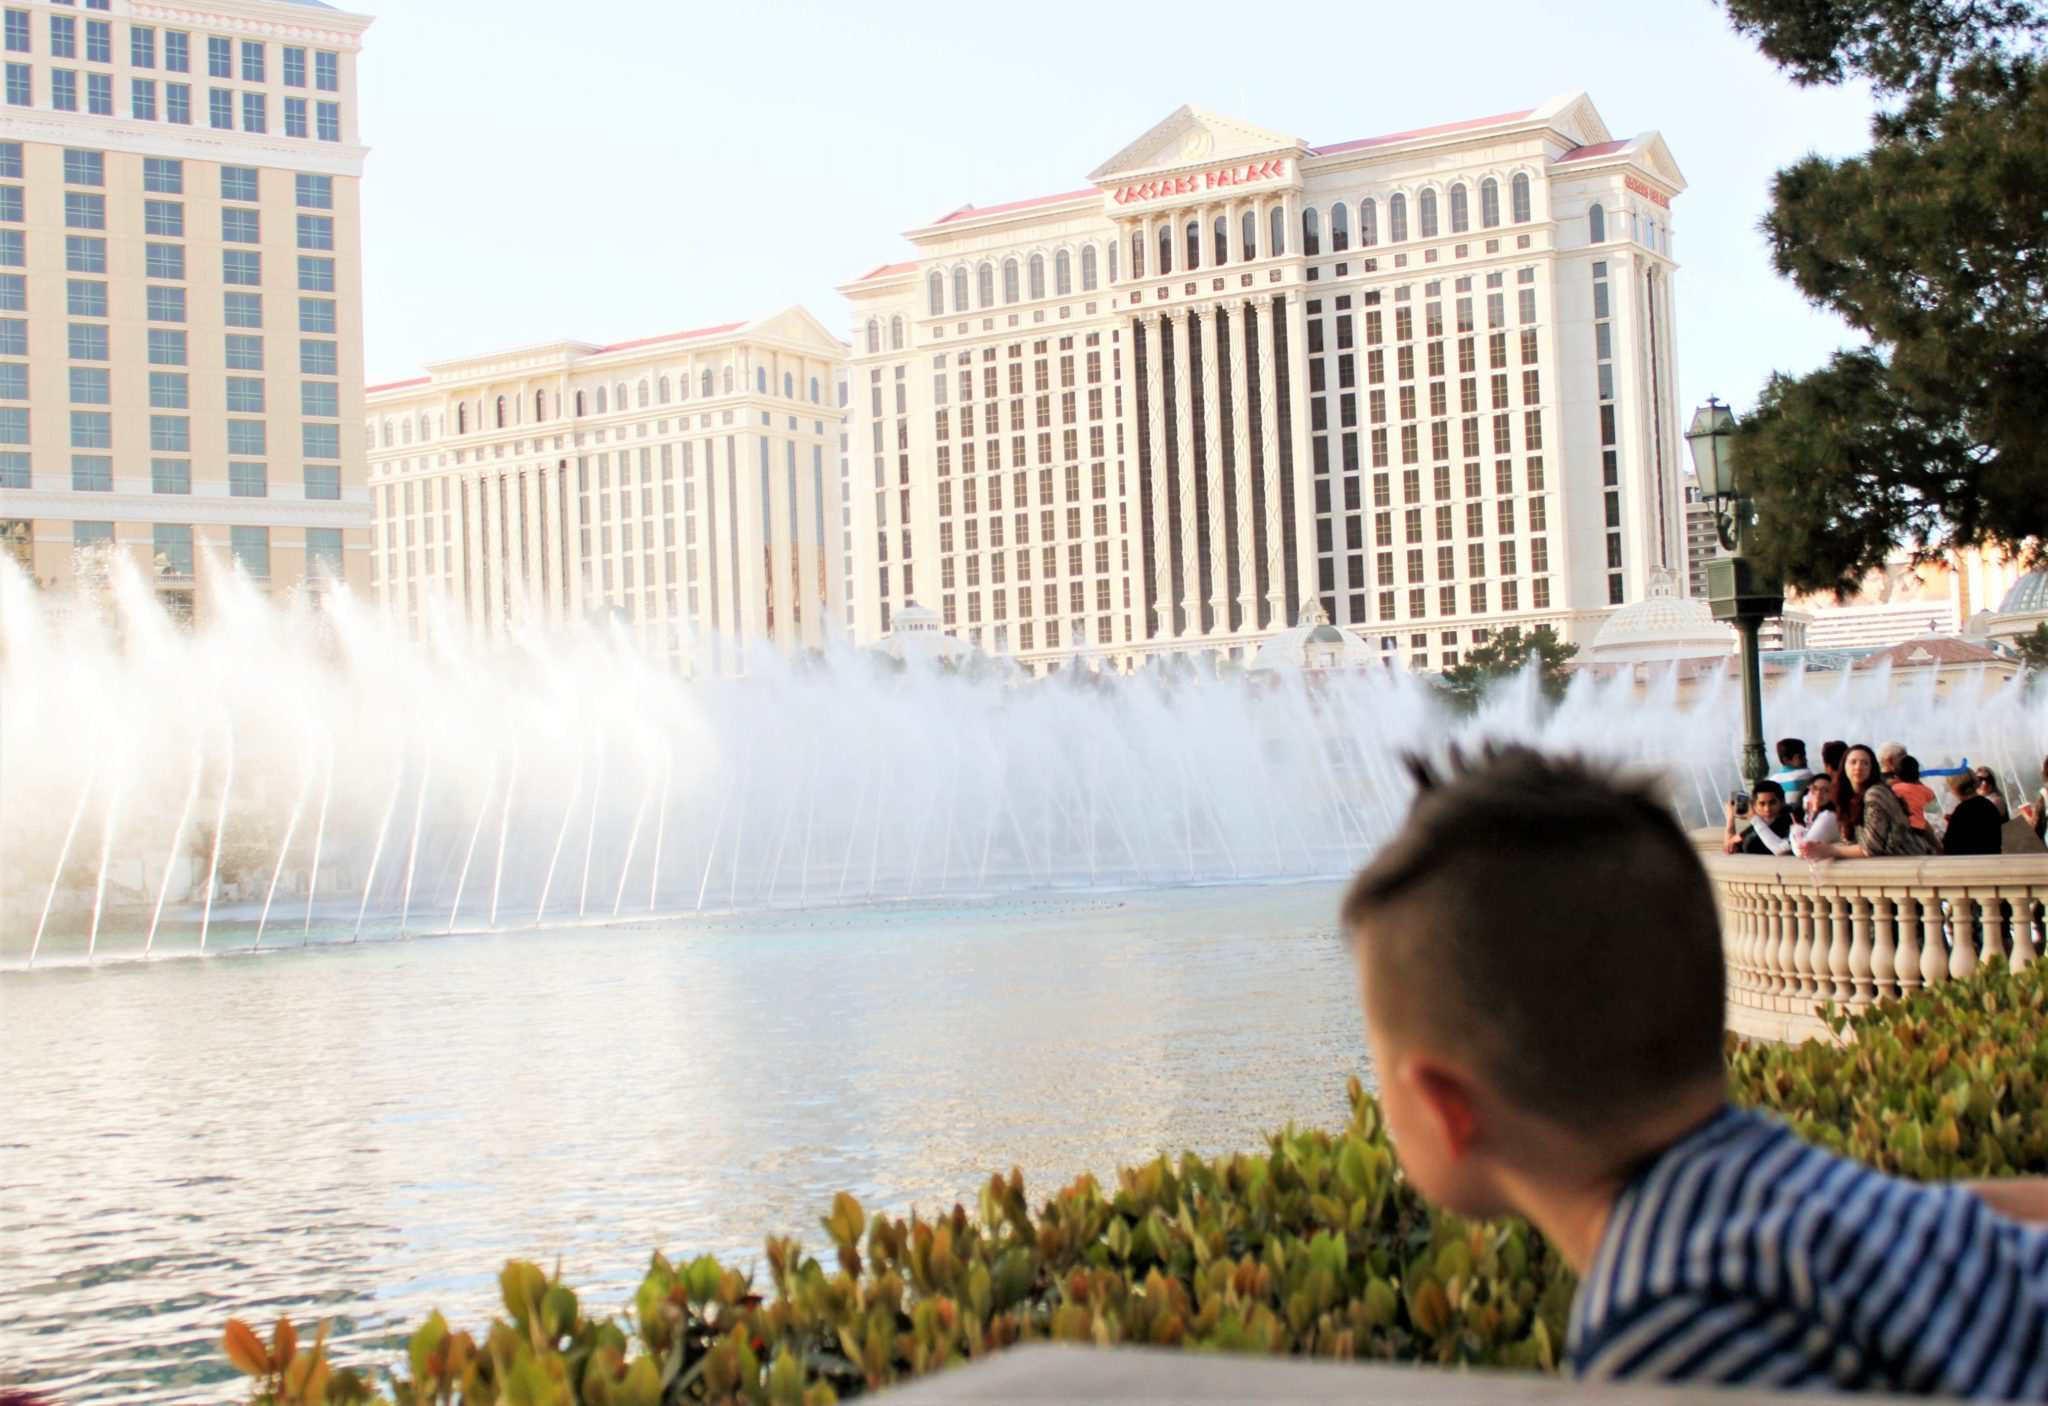 Family friendly guide to Las Vegas | Best things to do in Vegas with kids both on and off the strip #lasvegas #nevada #simplywander #bellagiowatershow #lasvegasstrip